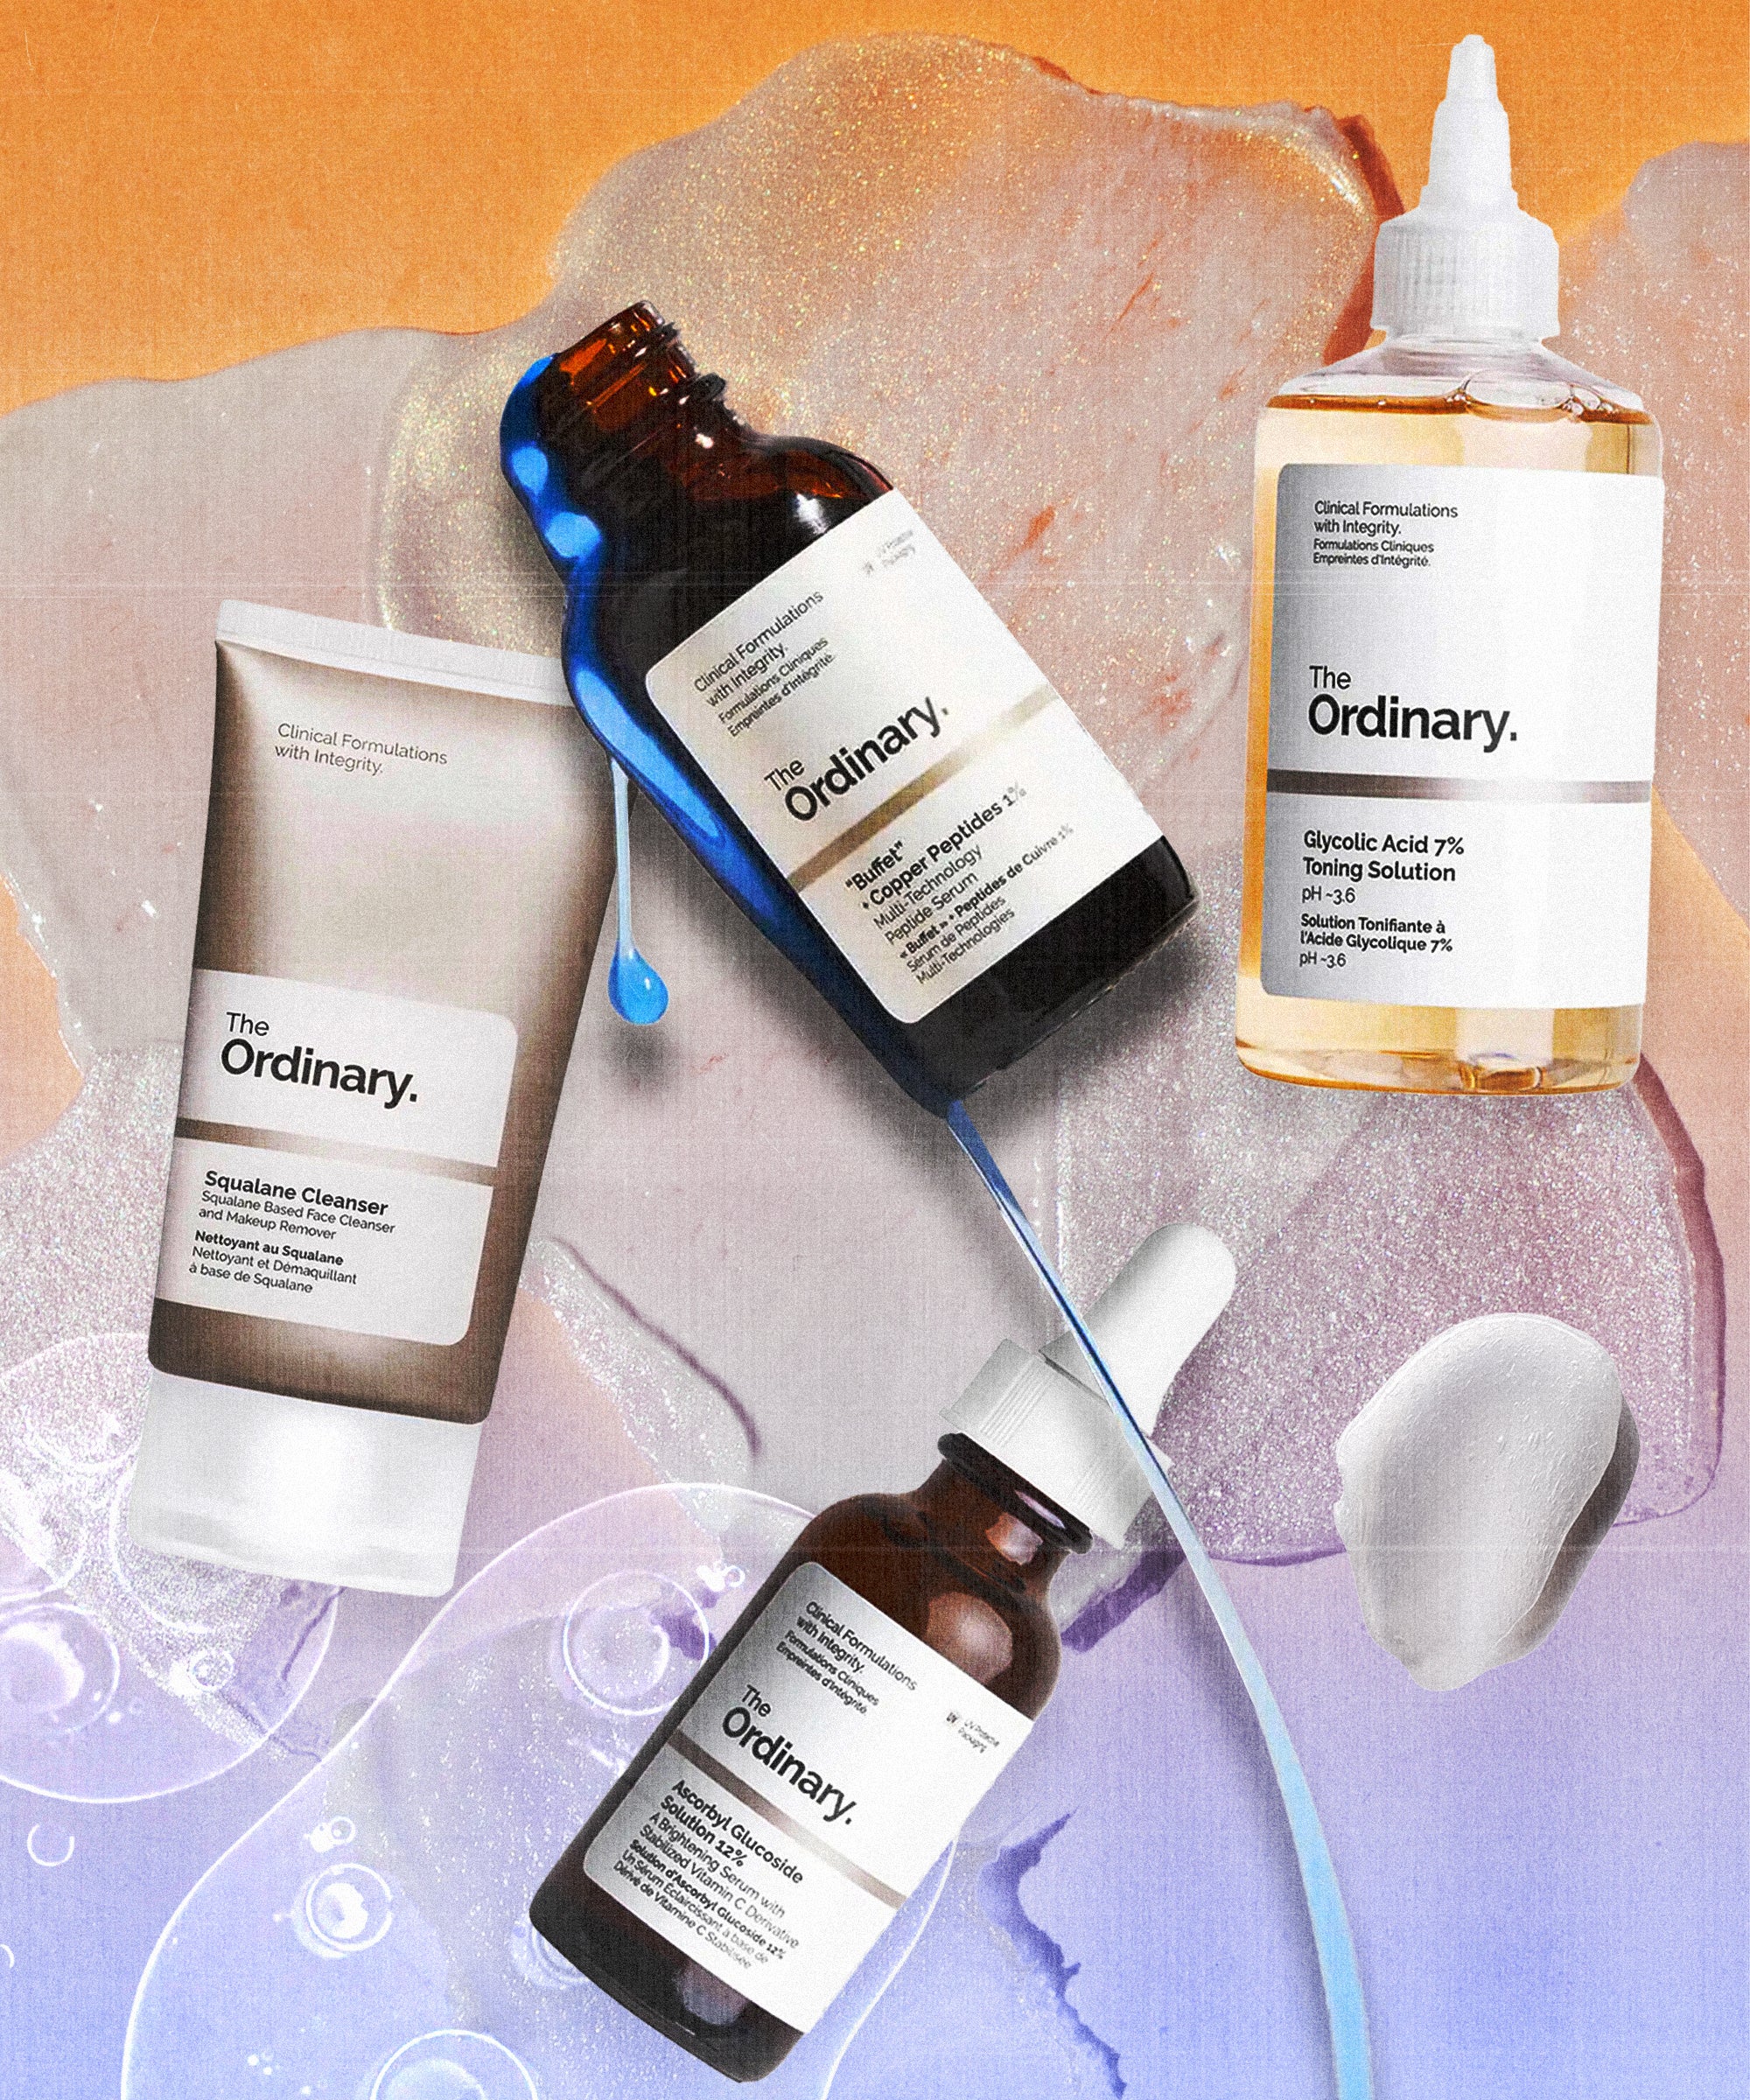 Spring Skincare Advice From The Ordinary's Experts